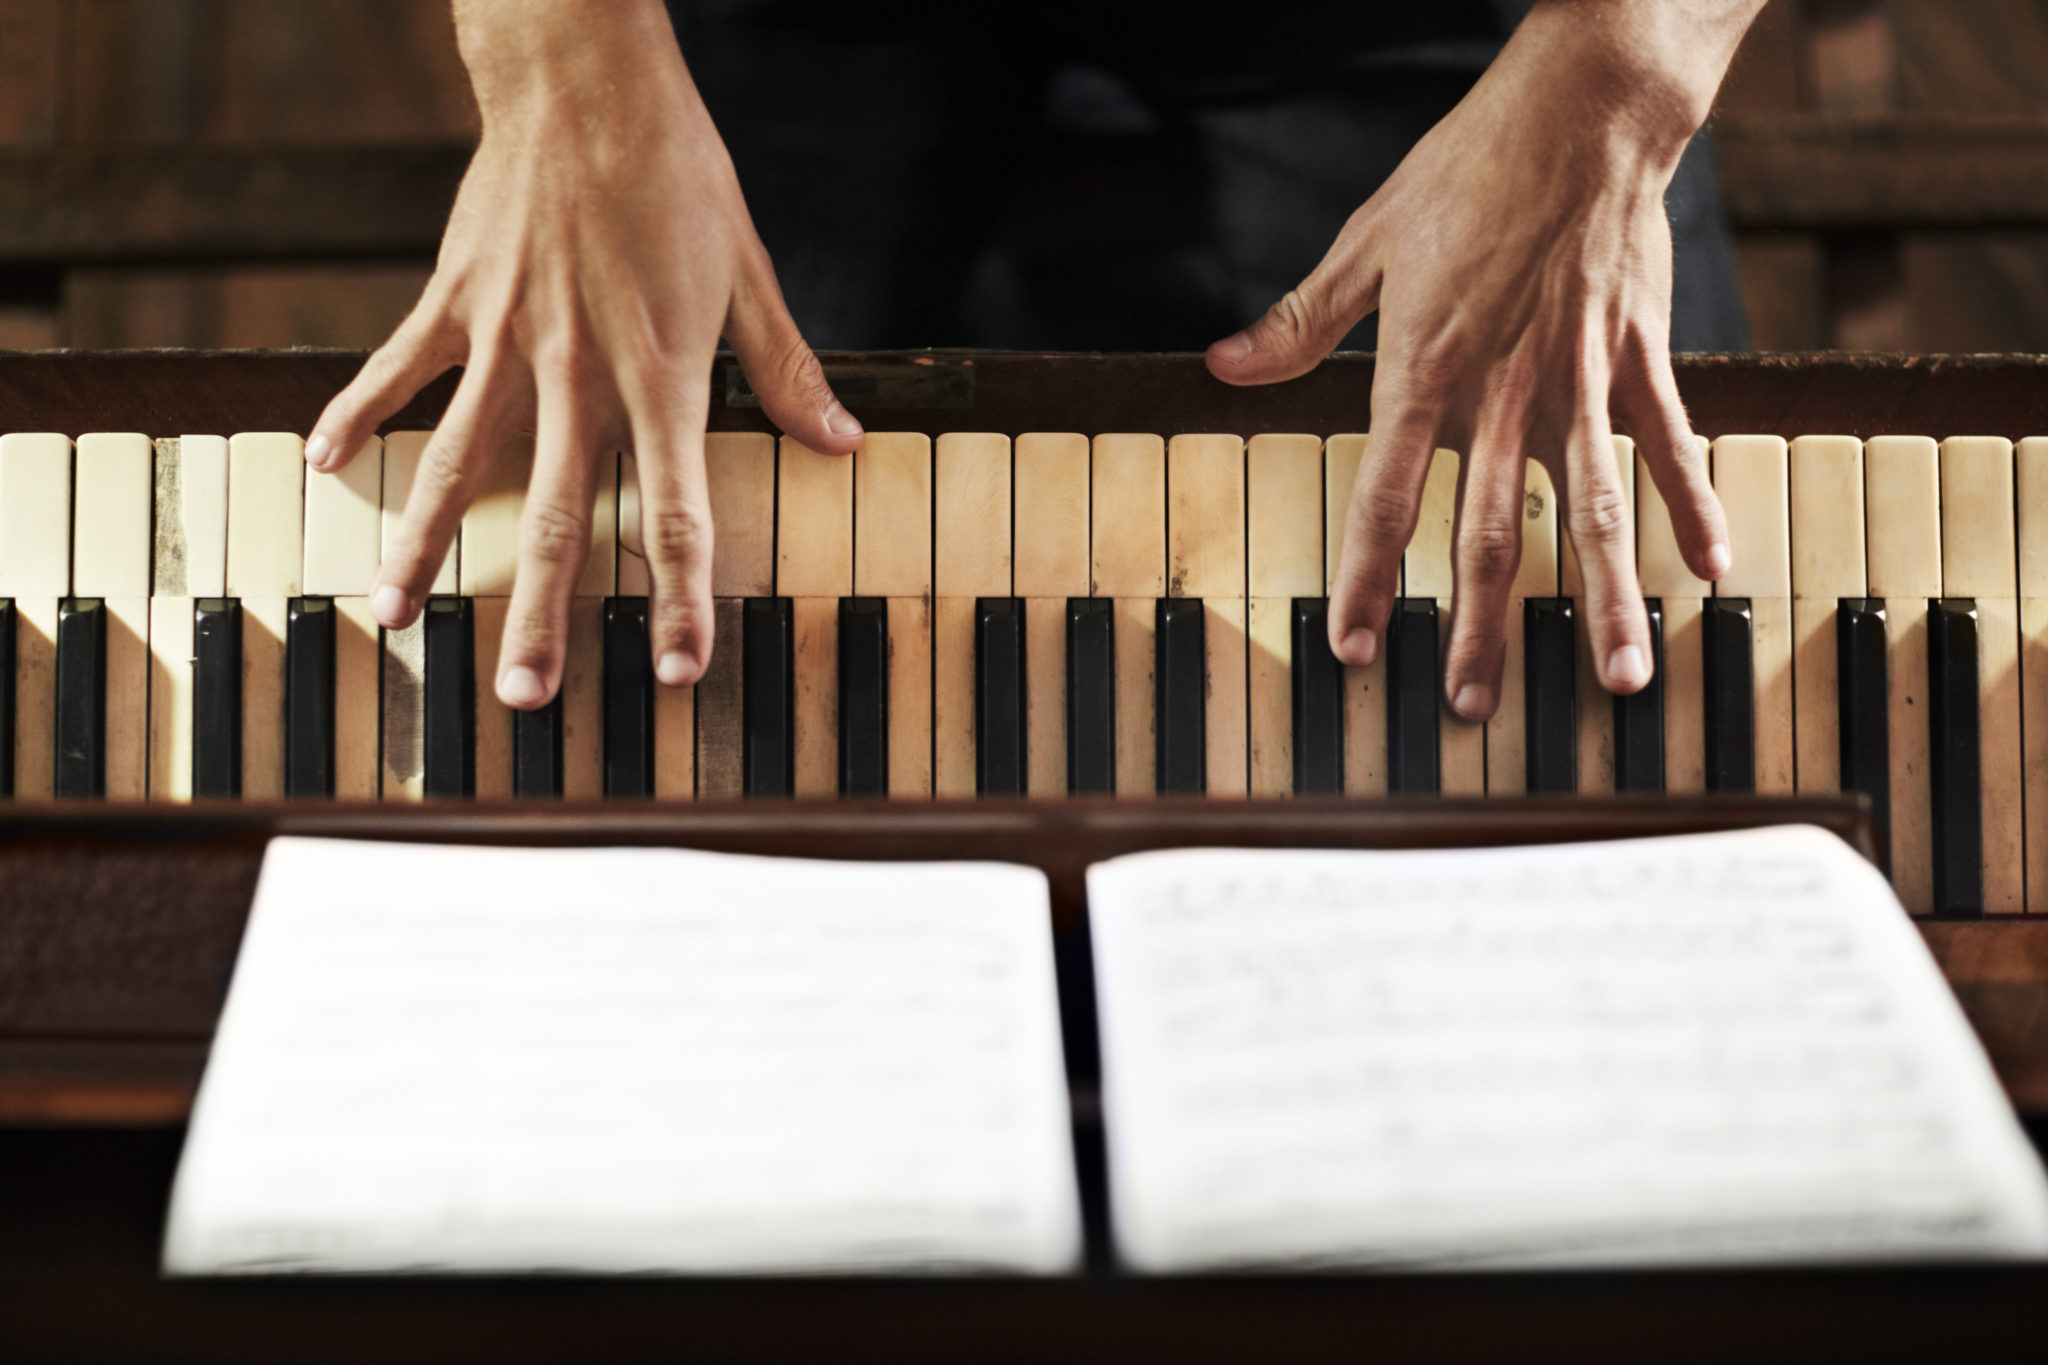 Cropped high-angle view of a pianist's hands